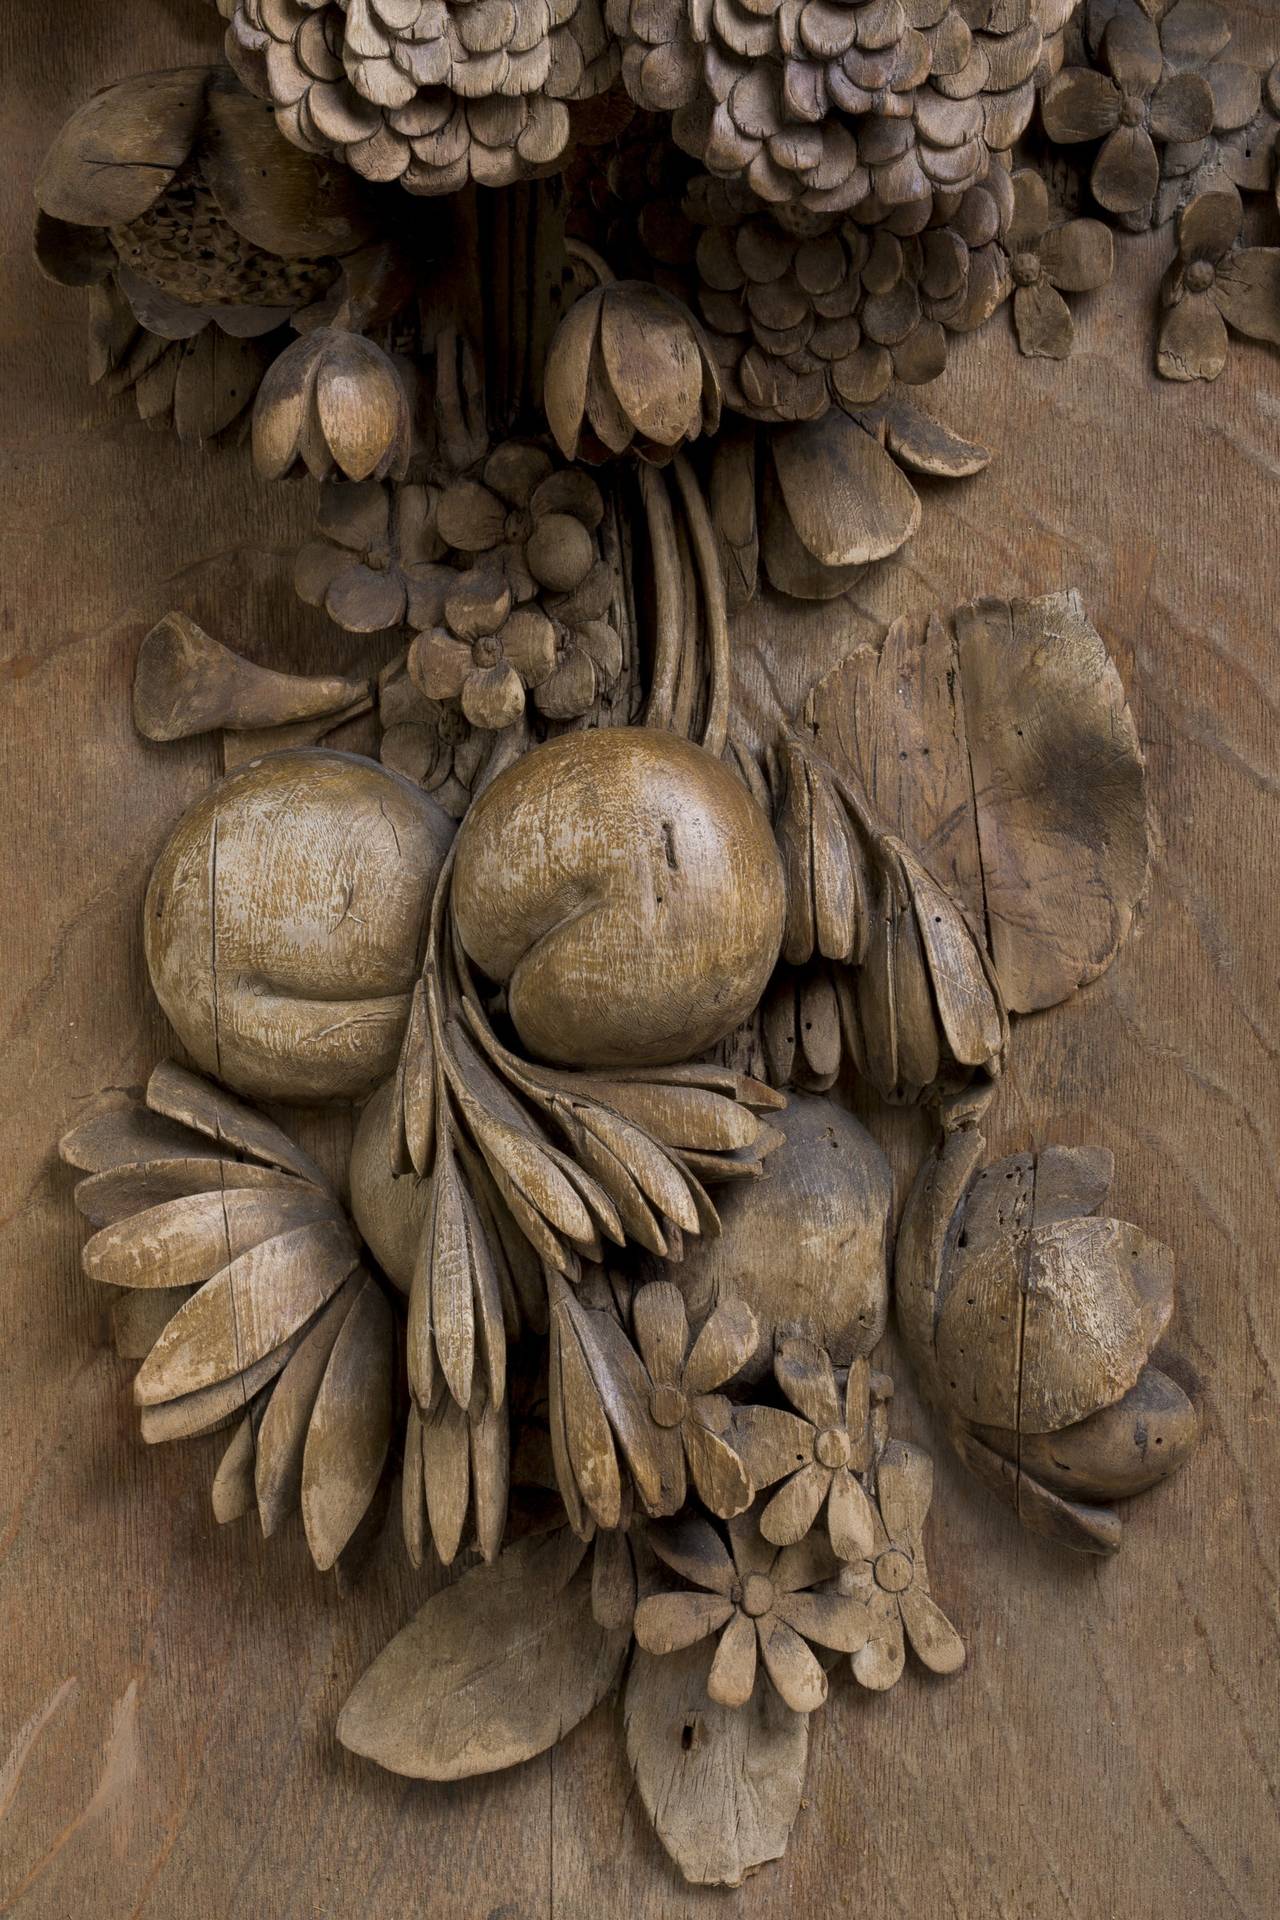 Of rectangular form, carved with ribbon-suspended grapes, pomegranates, flowers and other fruits and vegetation.
An unusual exponent of baroque sculpture, Grinling Gibbons (1648-1721) worked in all media, including marble, stone and bronze, but